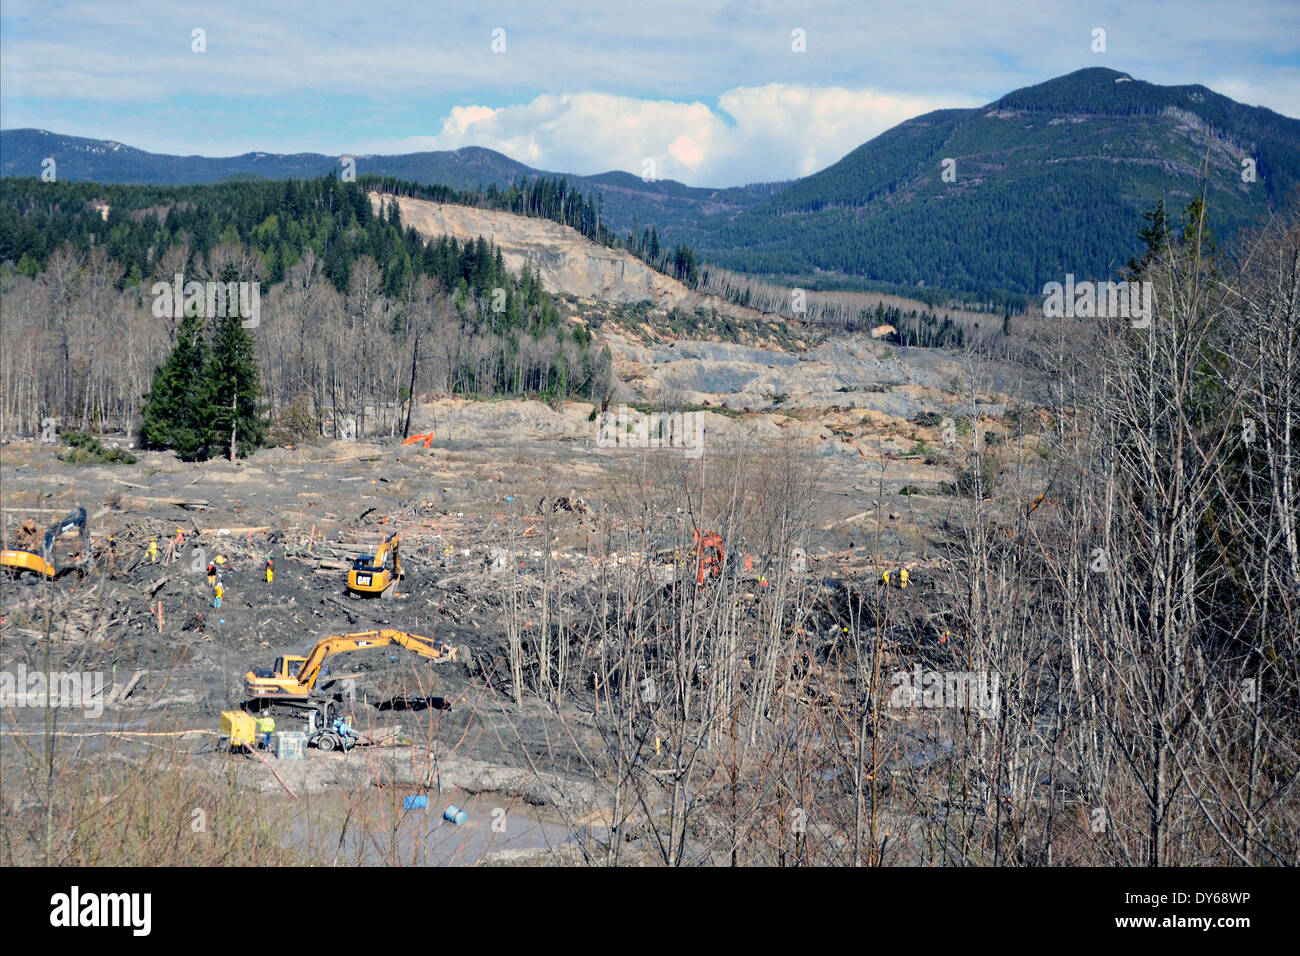 Workers continue search and recovery efforts as the ground slowly dries the landslide zone April 1, 2014 in Oso, Washington. A mudslide buried the tiny village killing at least 30 people. Stock Photo